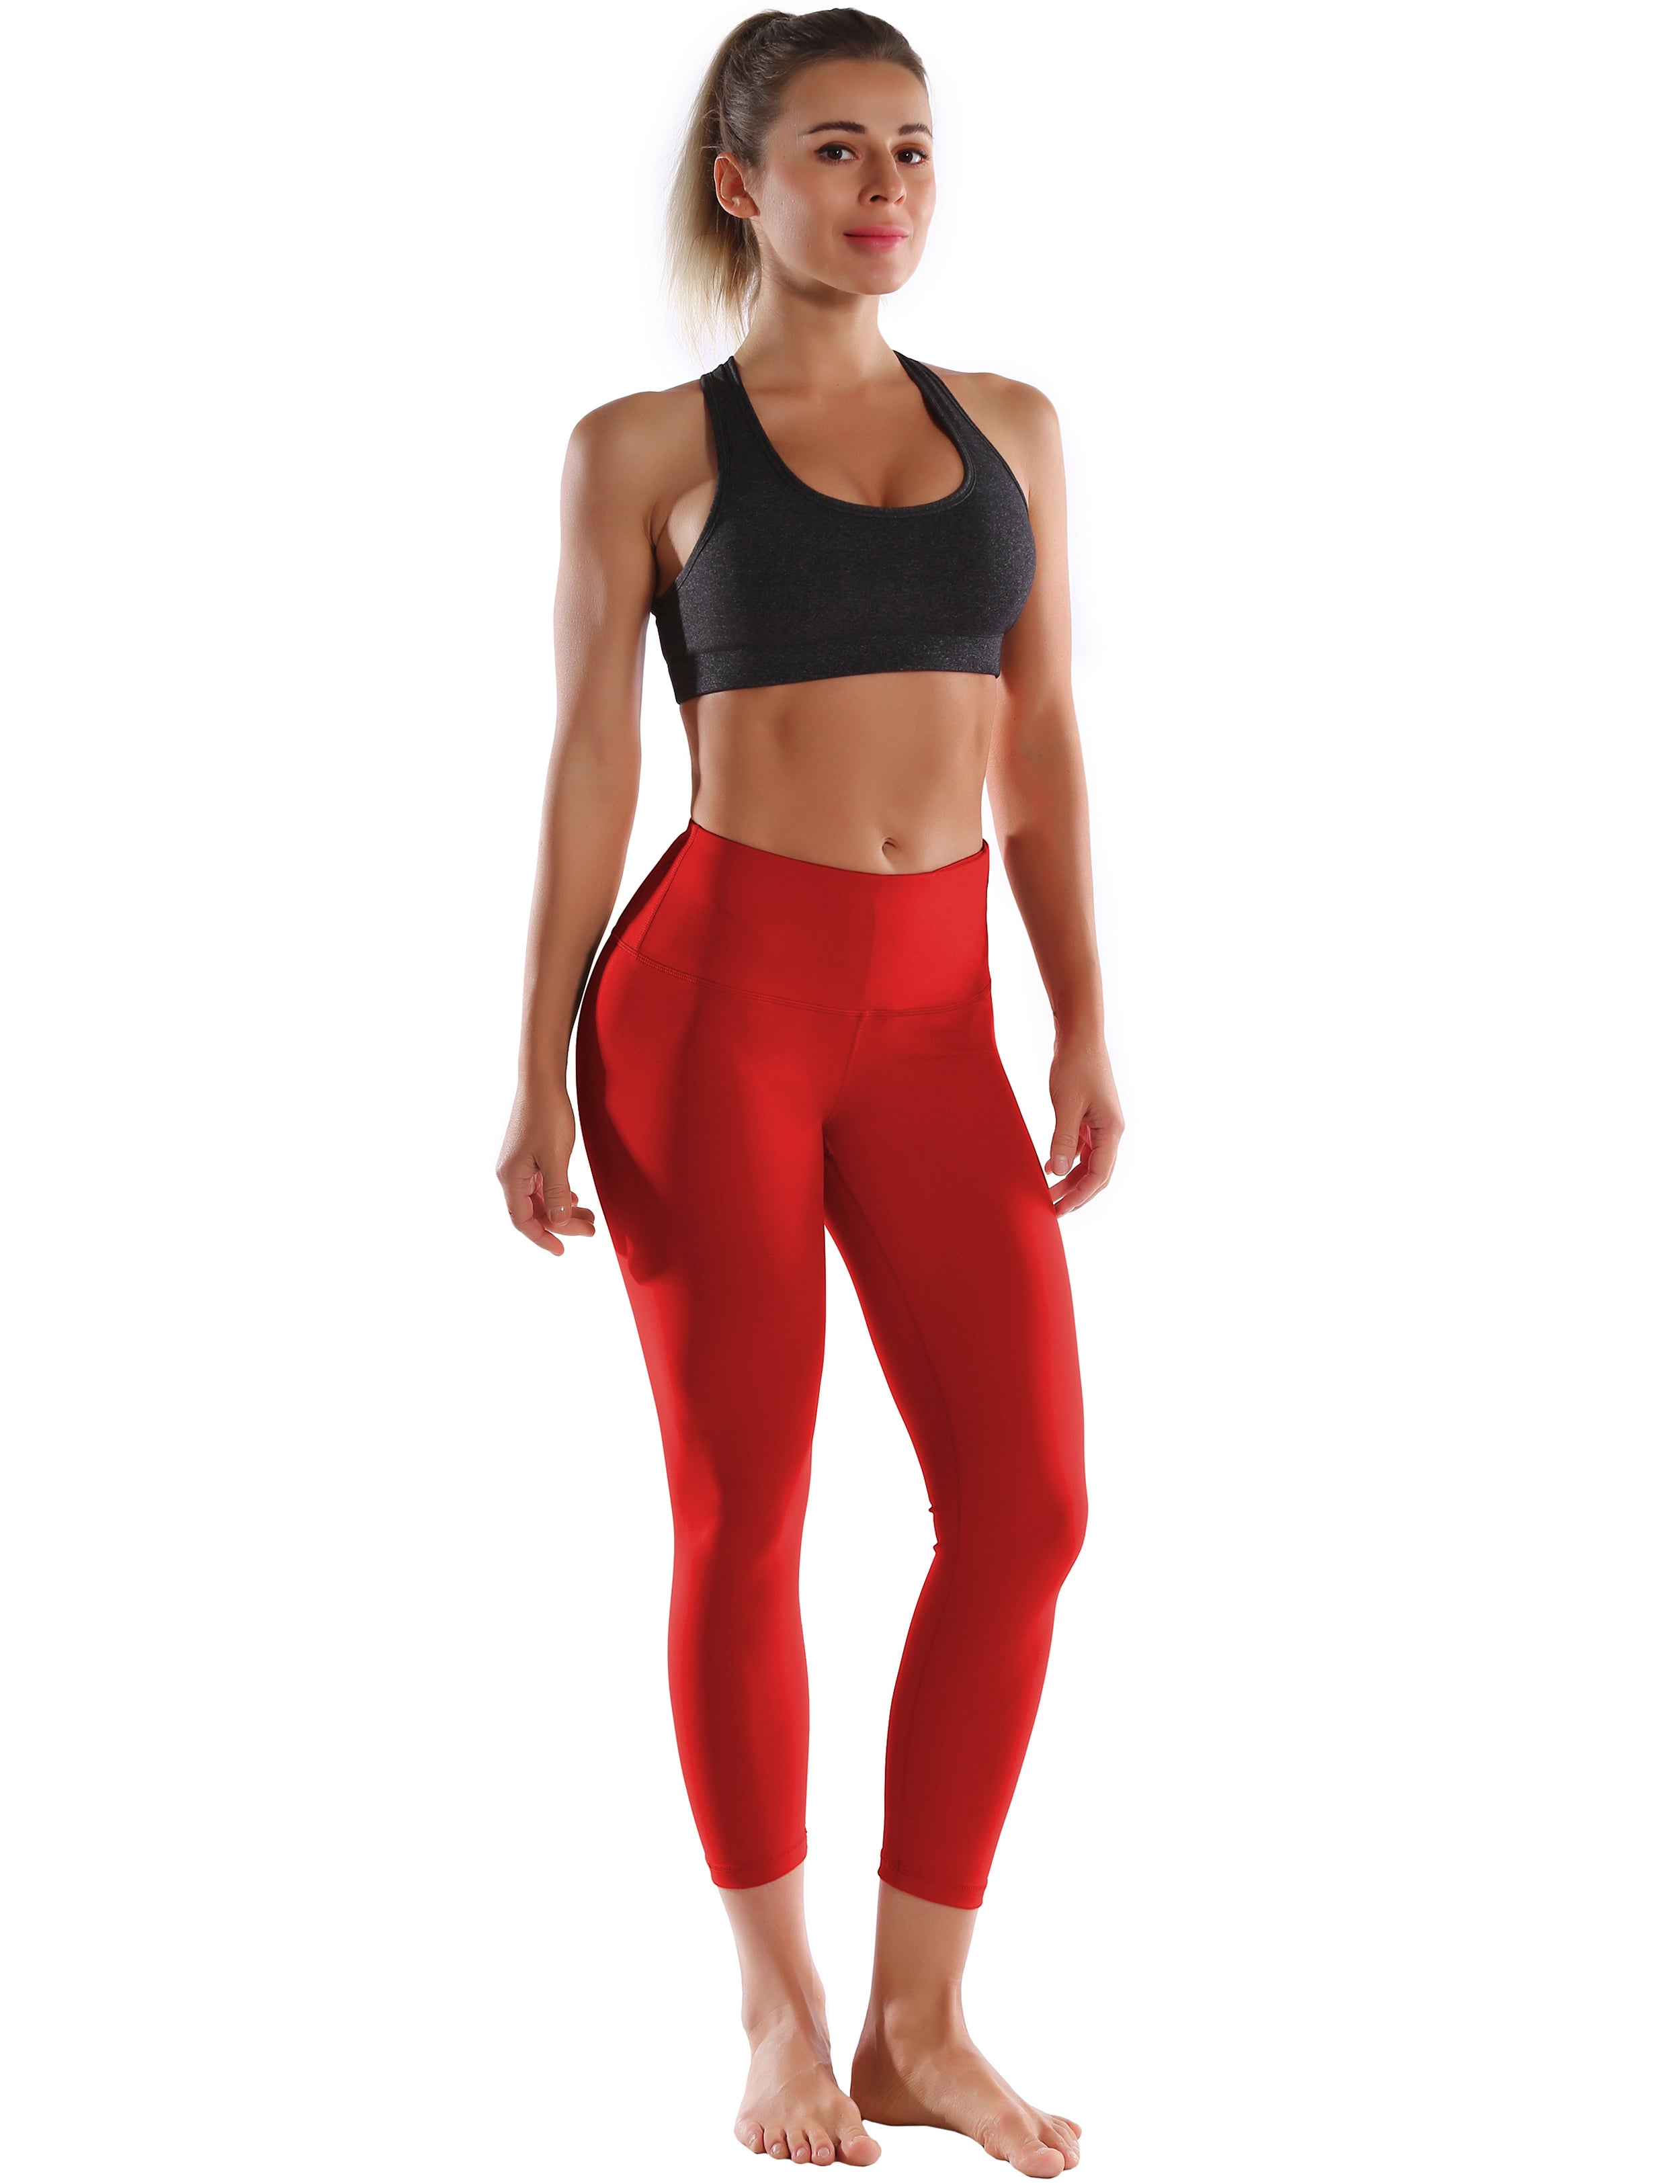 22" High Waist Crop Tight Capris scarlet 75%Nylon/25%Spandex Fabric doesn't attract lint easily 4-way stretch No see-through Moisture-wicking Tummy control Inner pocket